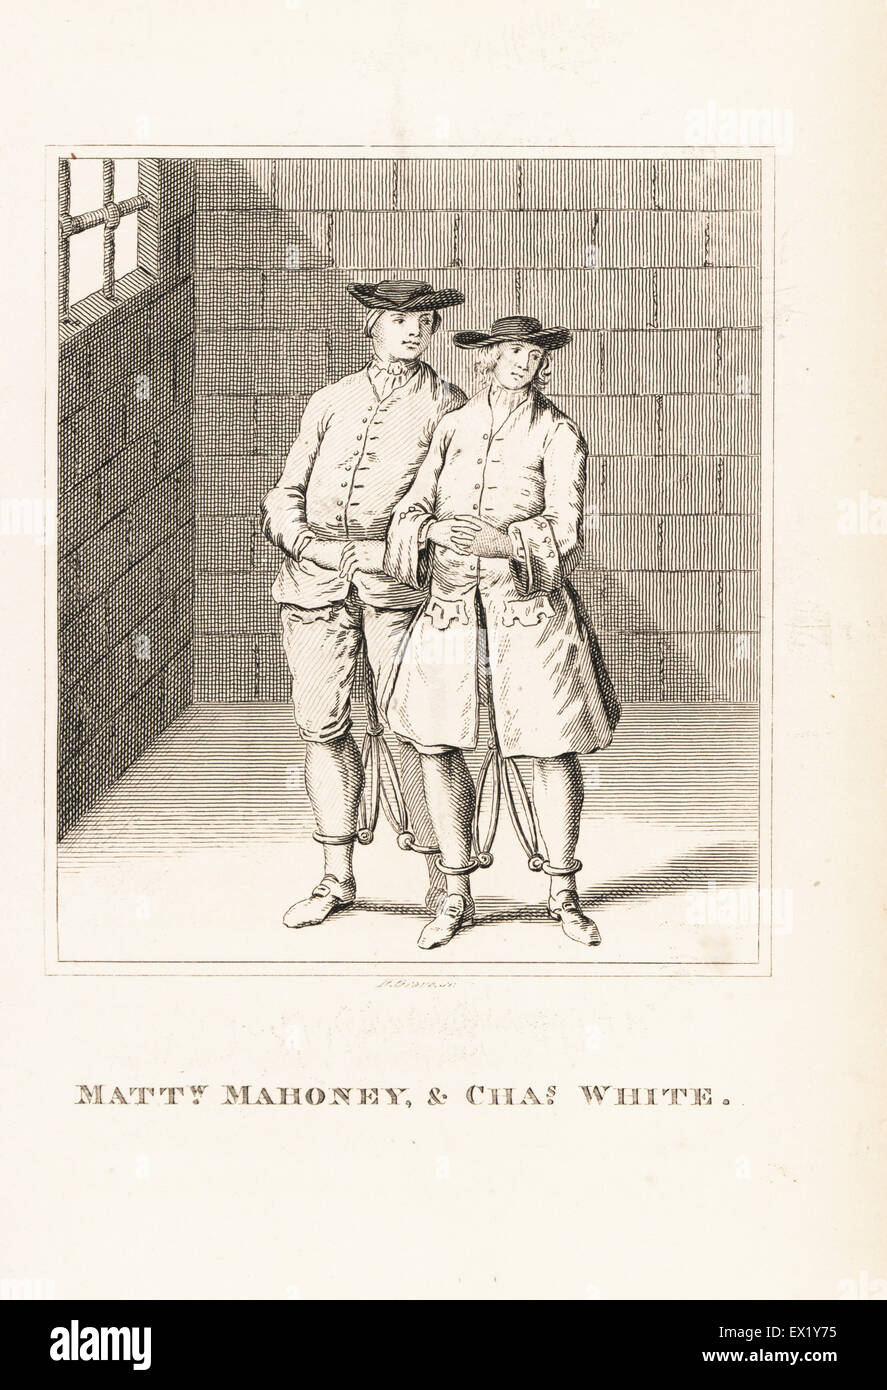 Matthew Mahoney and Charles White, executed for the murder of Sir John Dinely Goodere, 1741. Copperplate engraving by R. Grave from John Caulfield's Portraits, Memoirs and Characters of Remarkable Persons, Young, London, 1819. Stock Photo